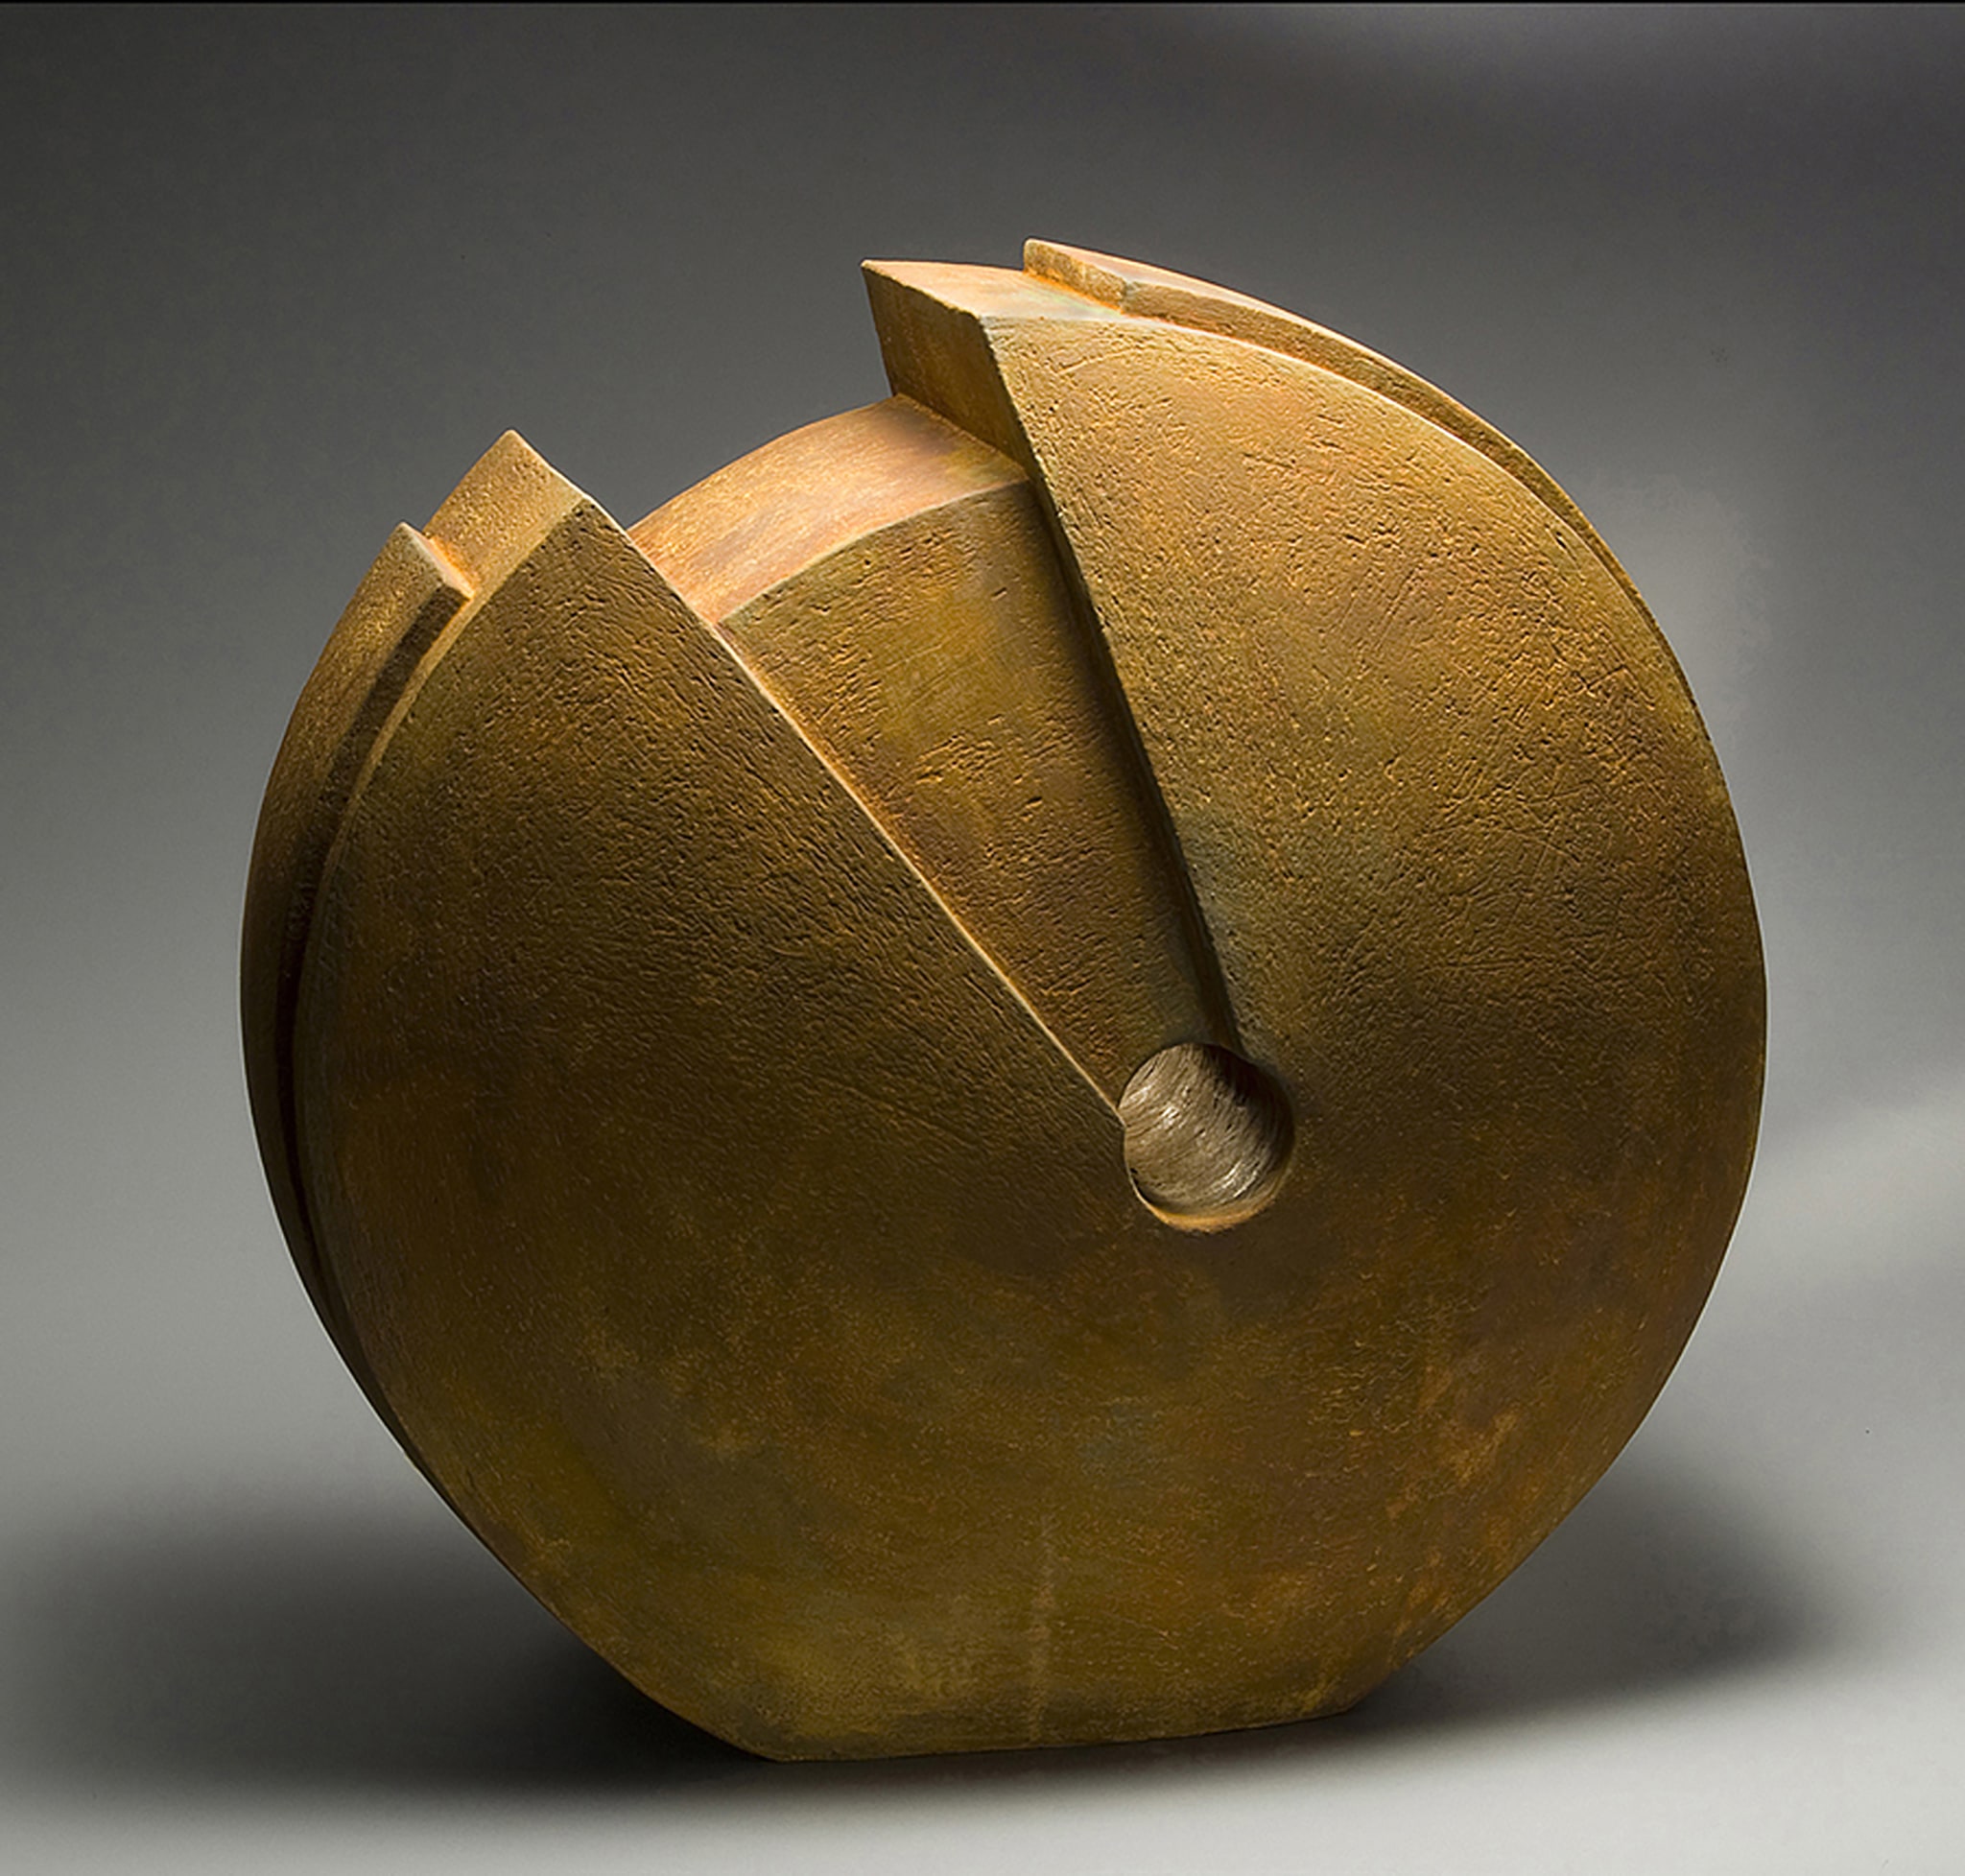 Fortunes Disk, 18" x 18" x 12", clay with iron oxide finish